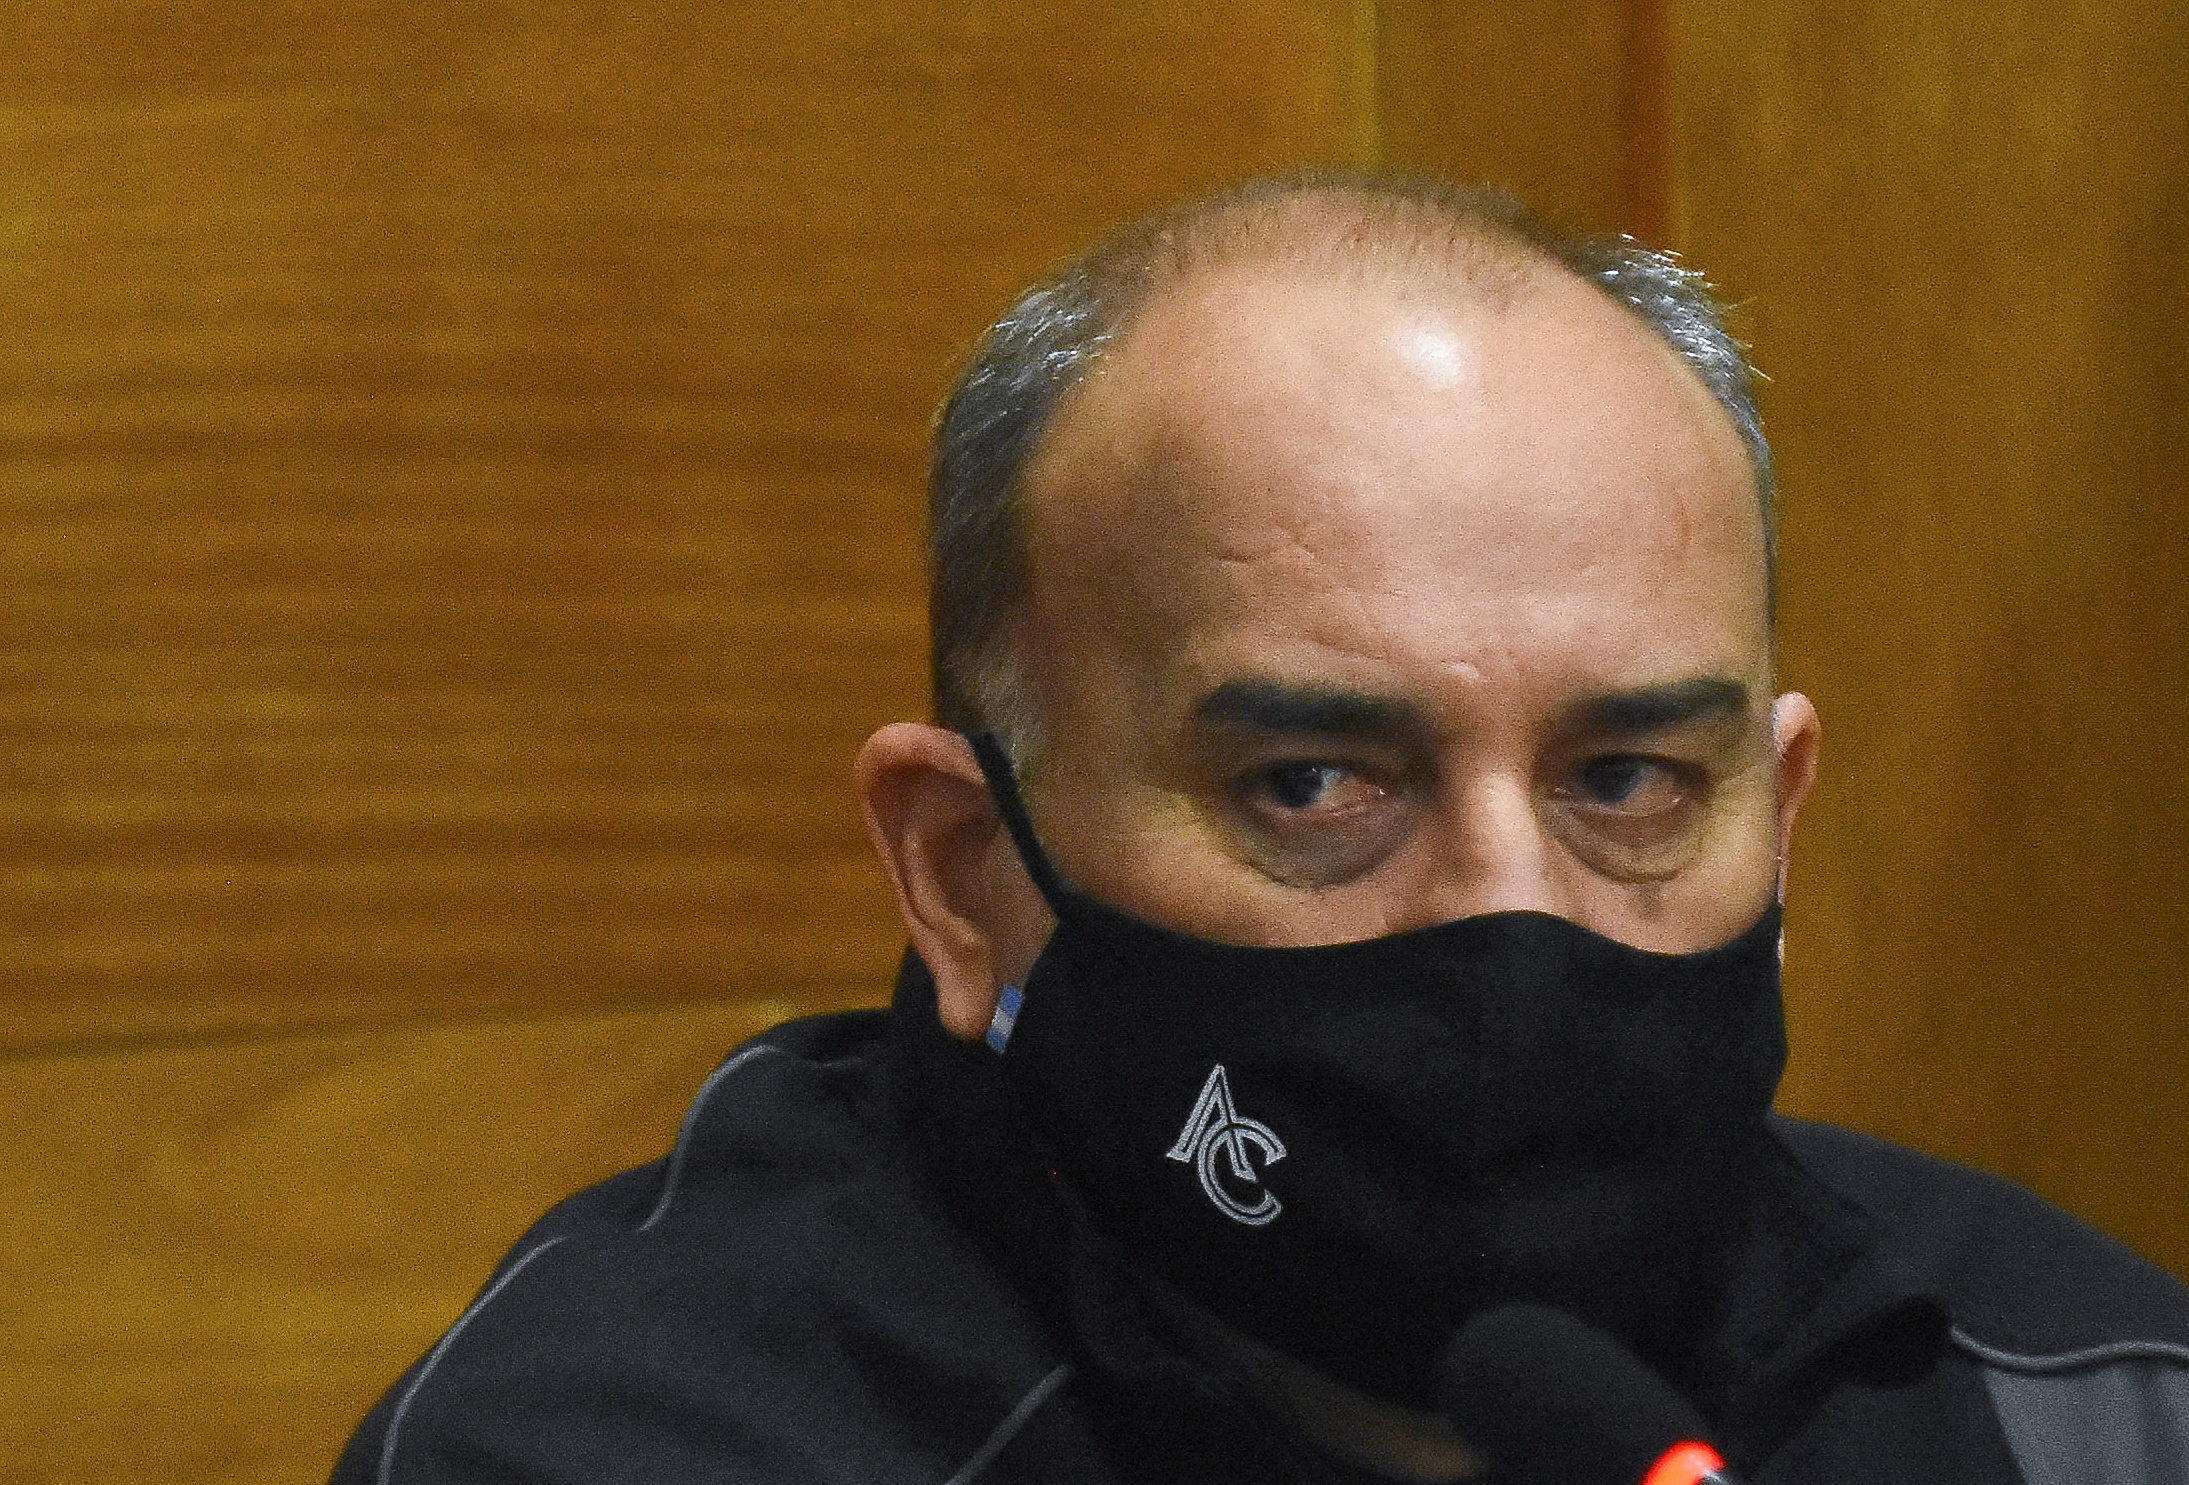 Argentine golfer Angel Cabrera faces trial on charges of domestic violence, in Cordoba